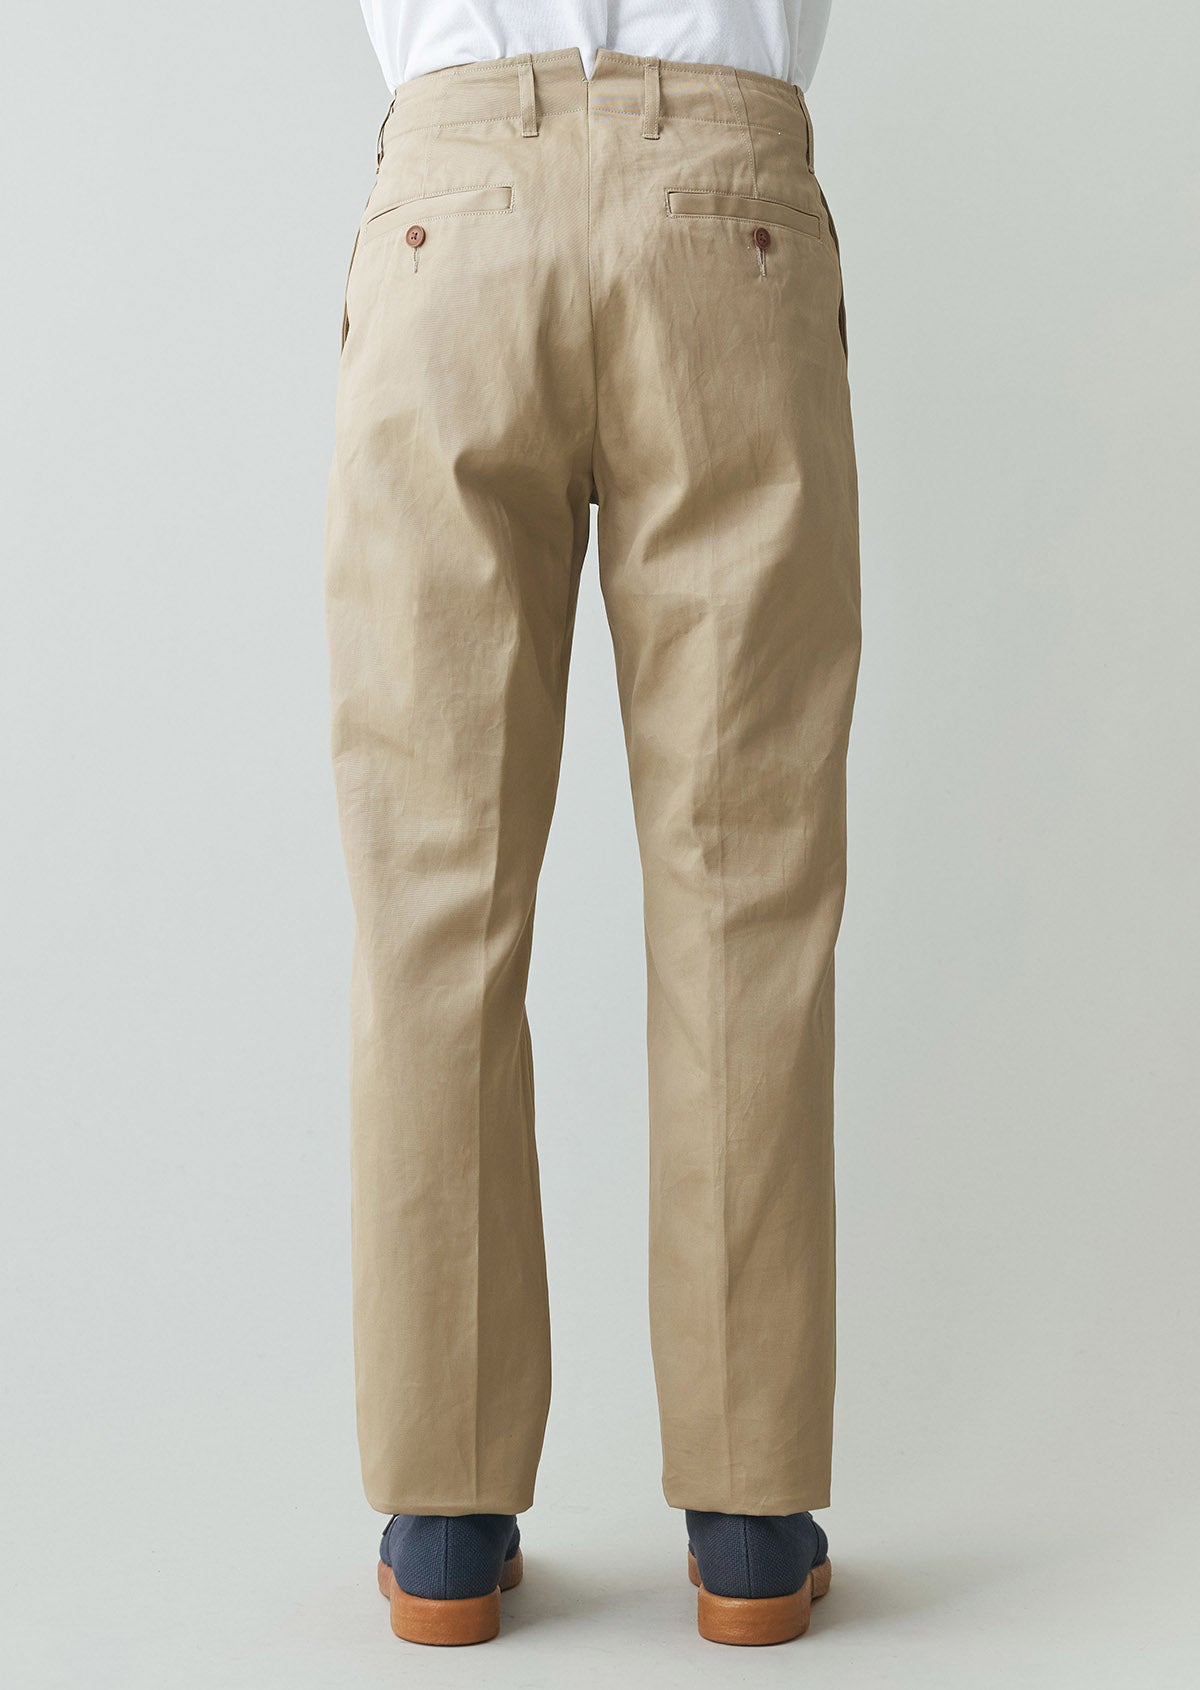 CHINO TROUSERS BEIGE 8011-1404